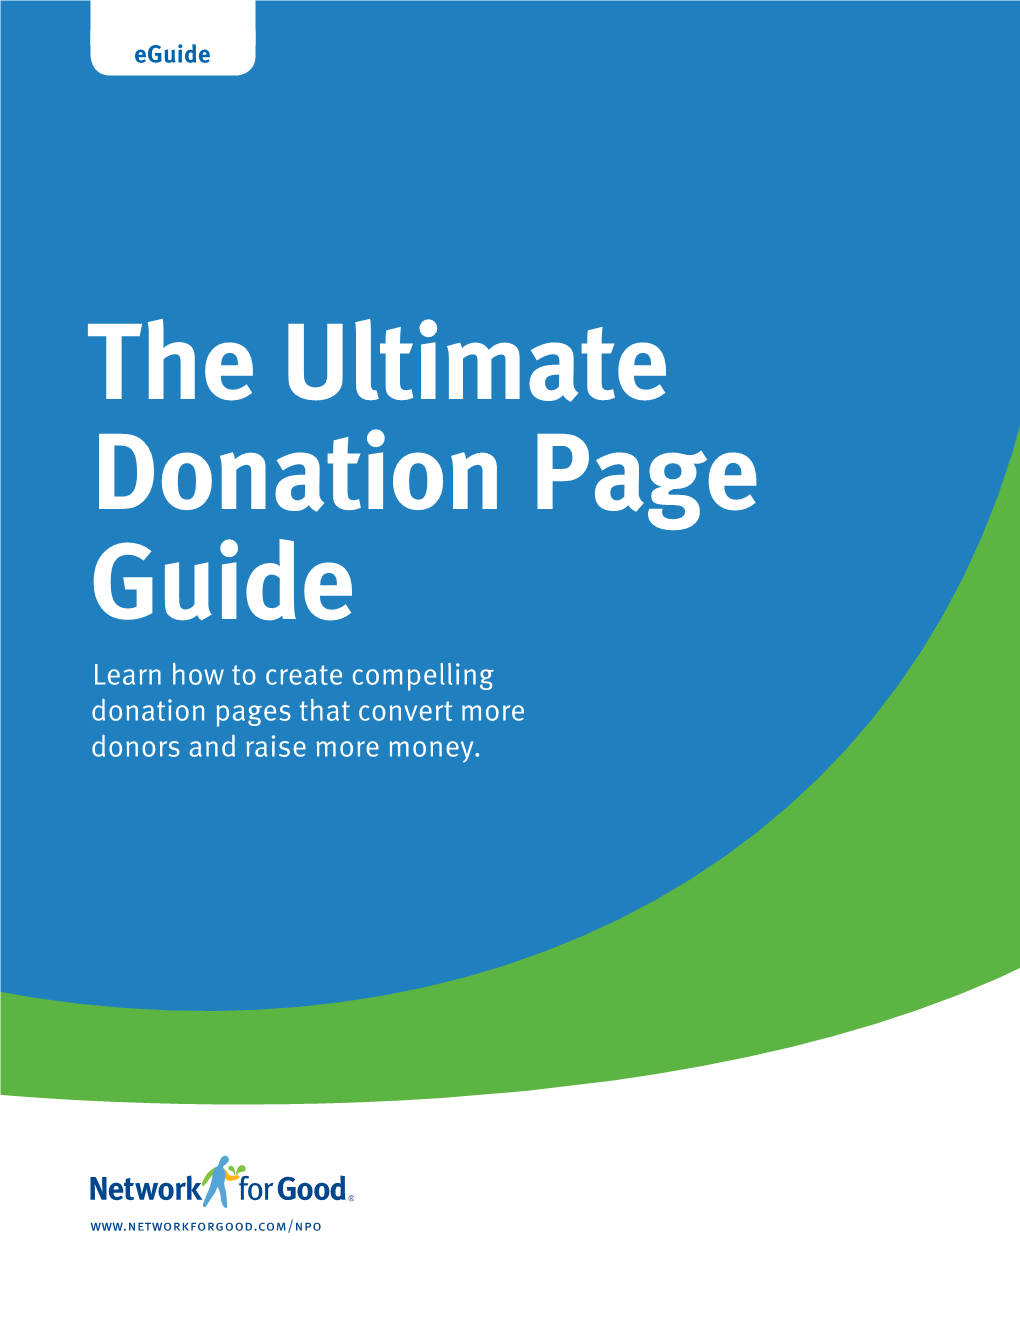 The Ultimate Donation Page Guide Learn How to Create Compelling Donation Pages That Convert More Donors and Raise More Money